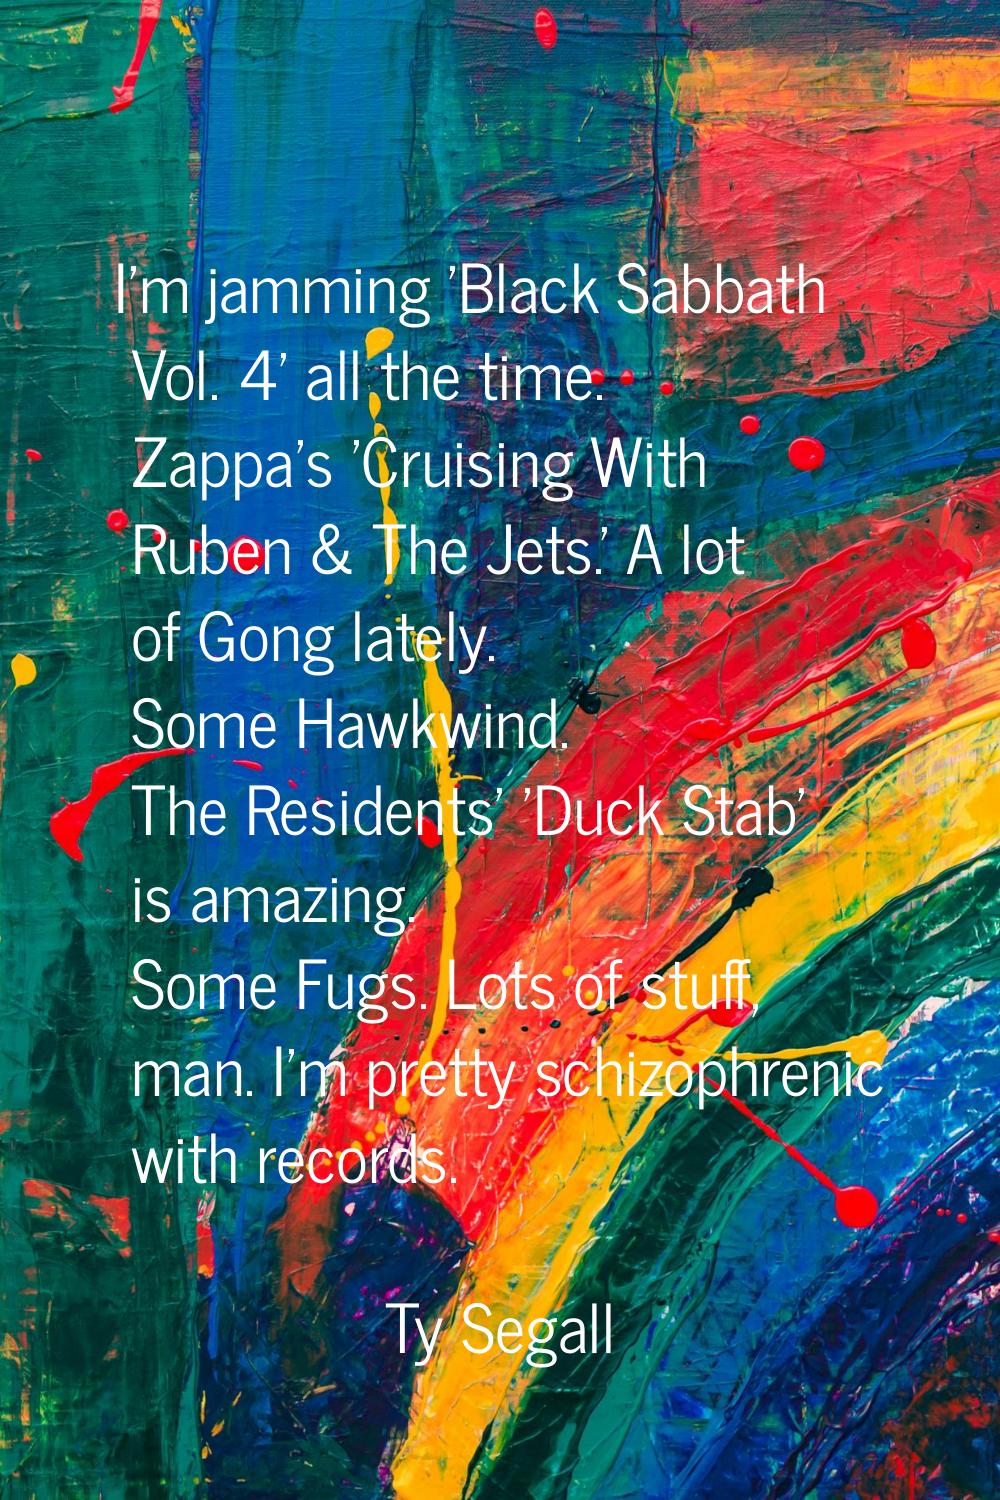 I'm jamming 'Black Sabbath Vol. 4' all the time. Zappa's 'Cruising With Ruben & The Jets.' A lot of